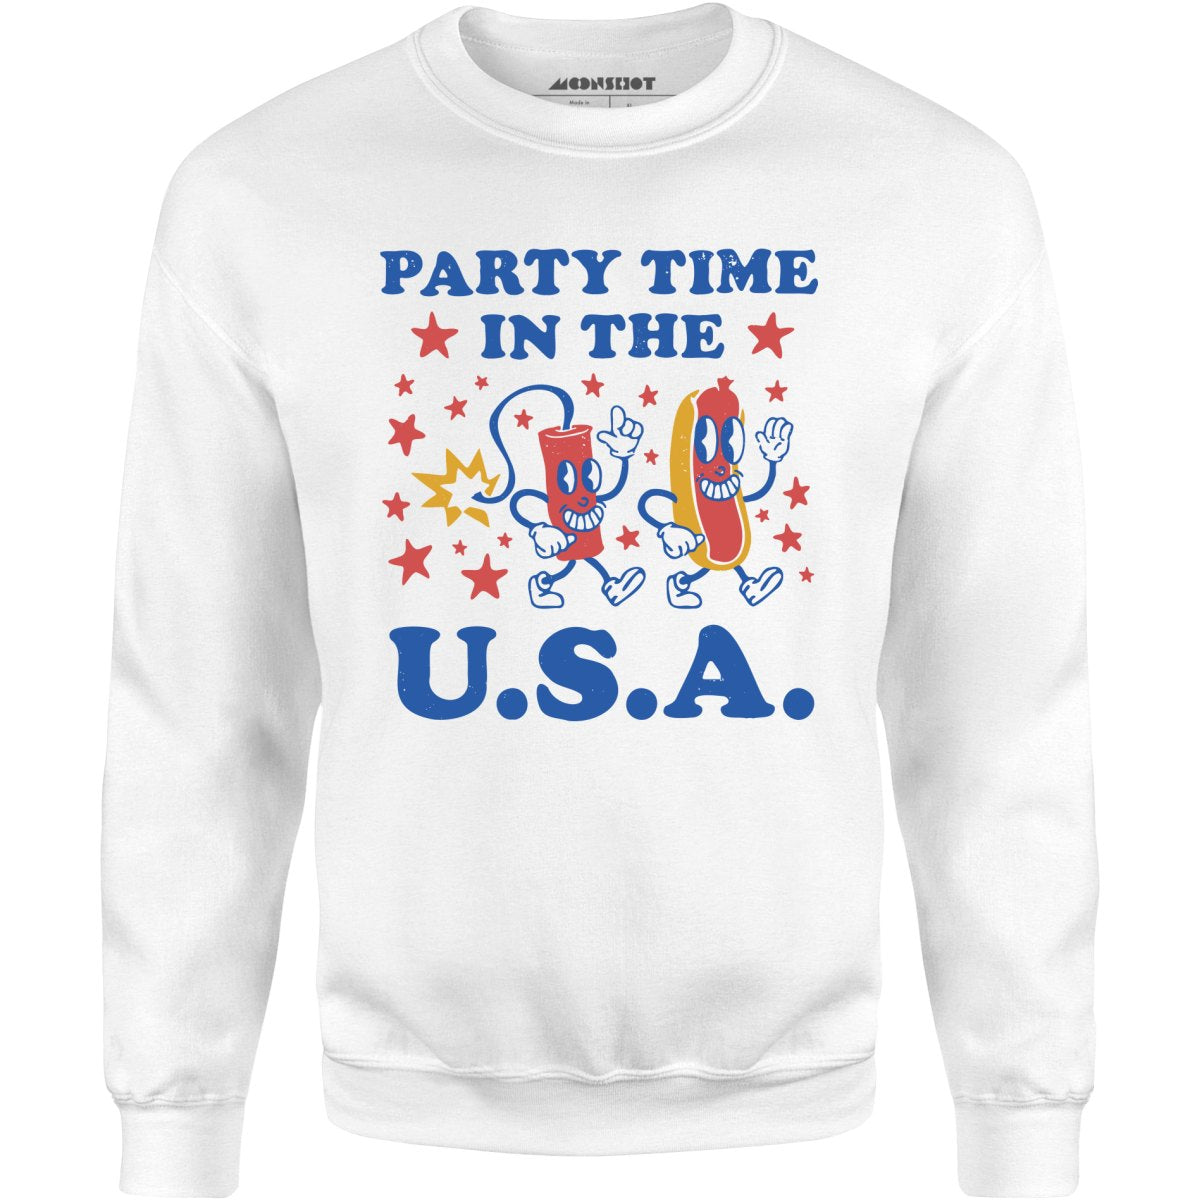 Party Time in The U.S.A. - Unisex Sweatshirt